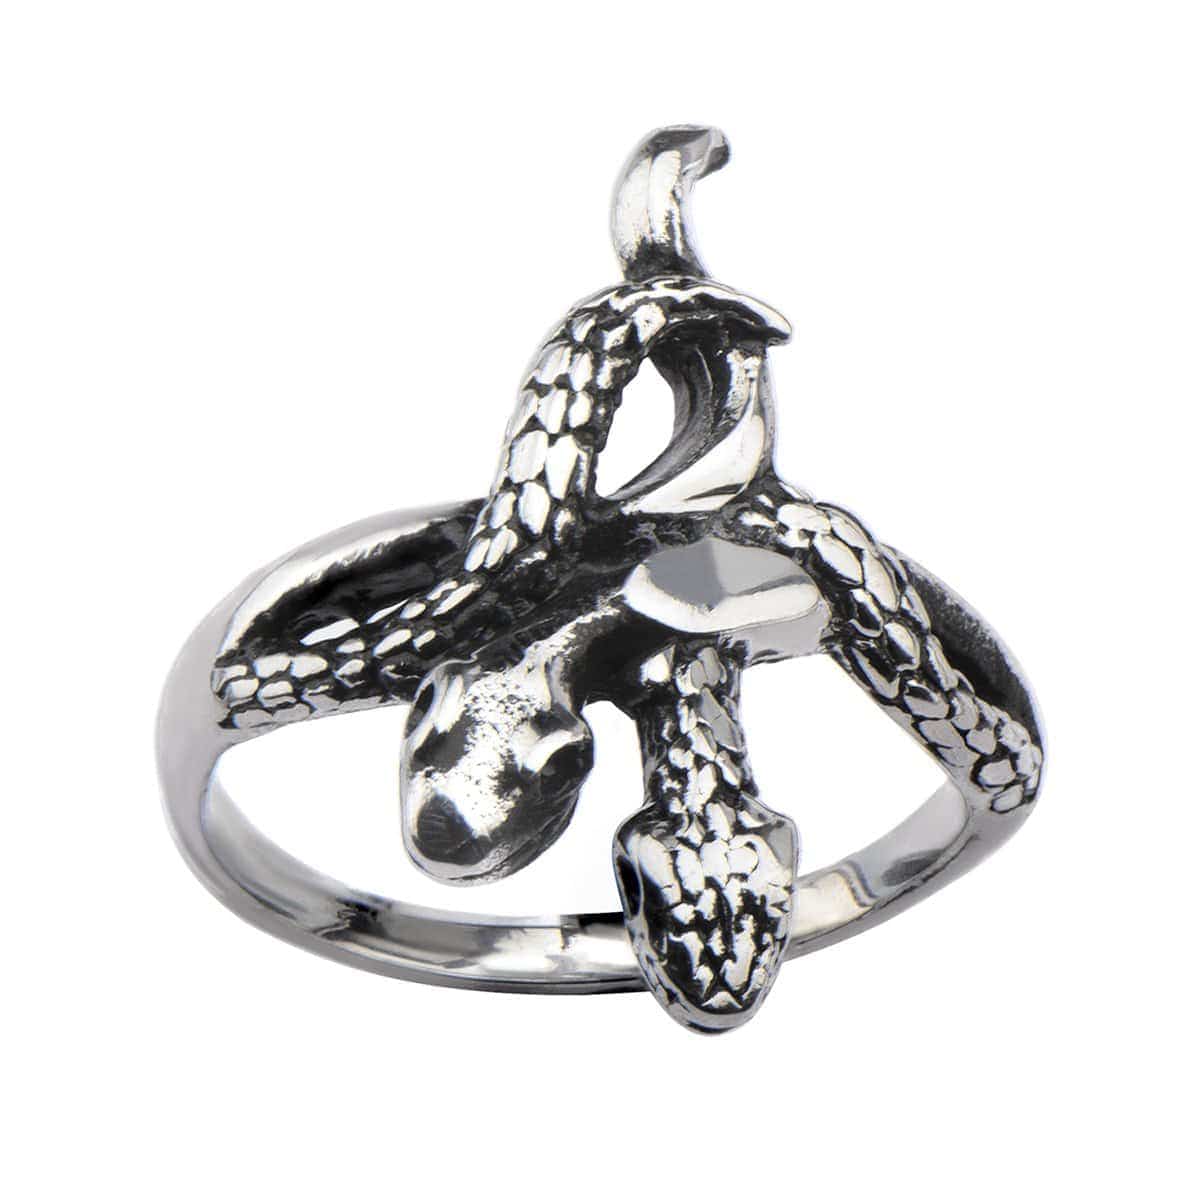 INOX JEWELRY Rings Antiqued Silver Tone Stainless Steel Two Alternate Snake Ring